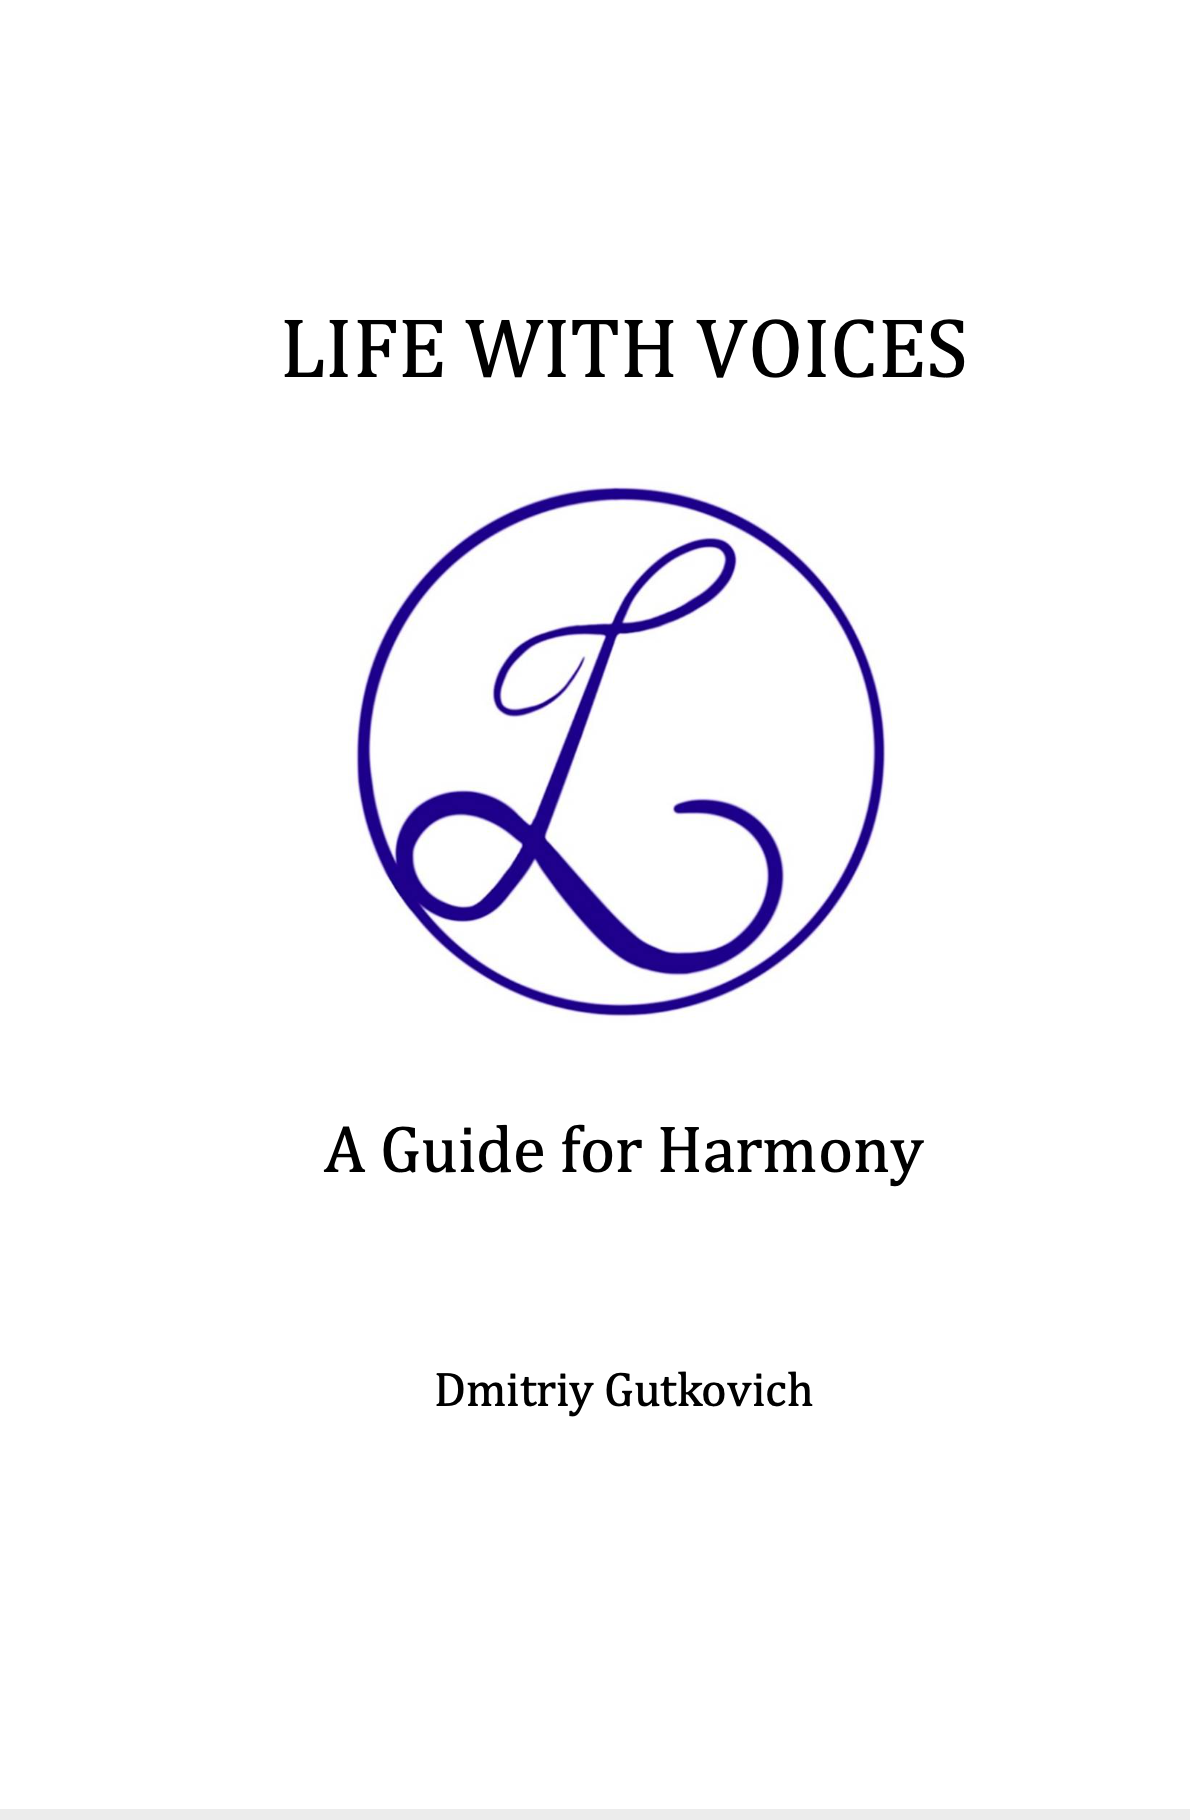 BOOK REVIEW: Life with Voices by Dmitriy Gutkovich